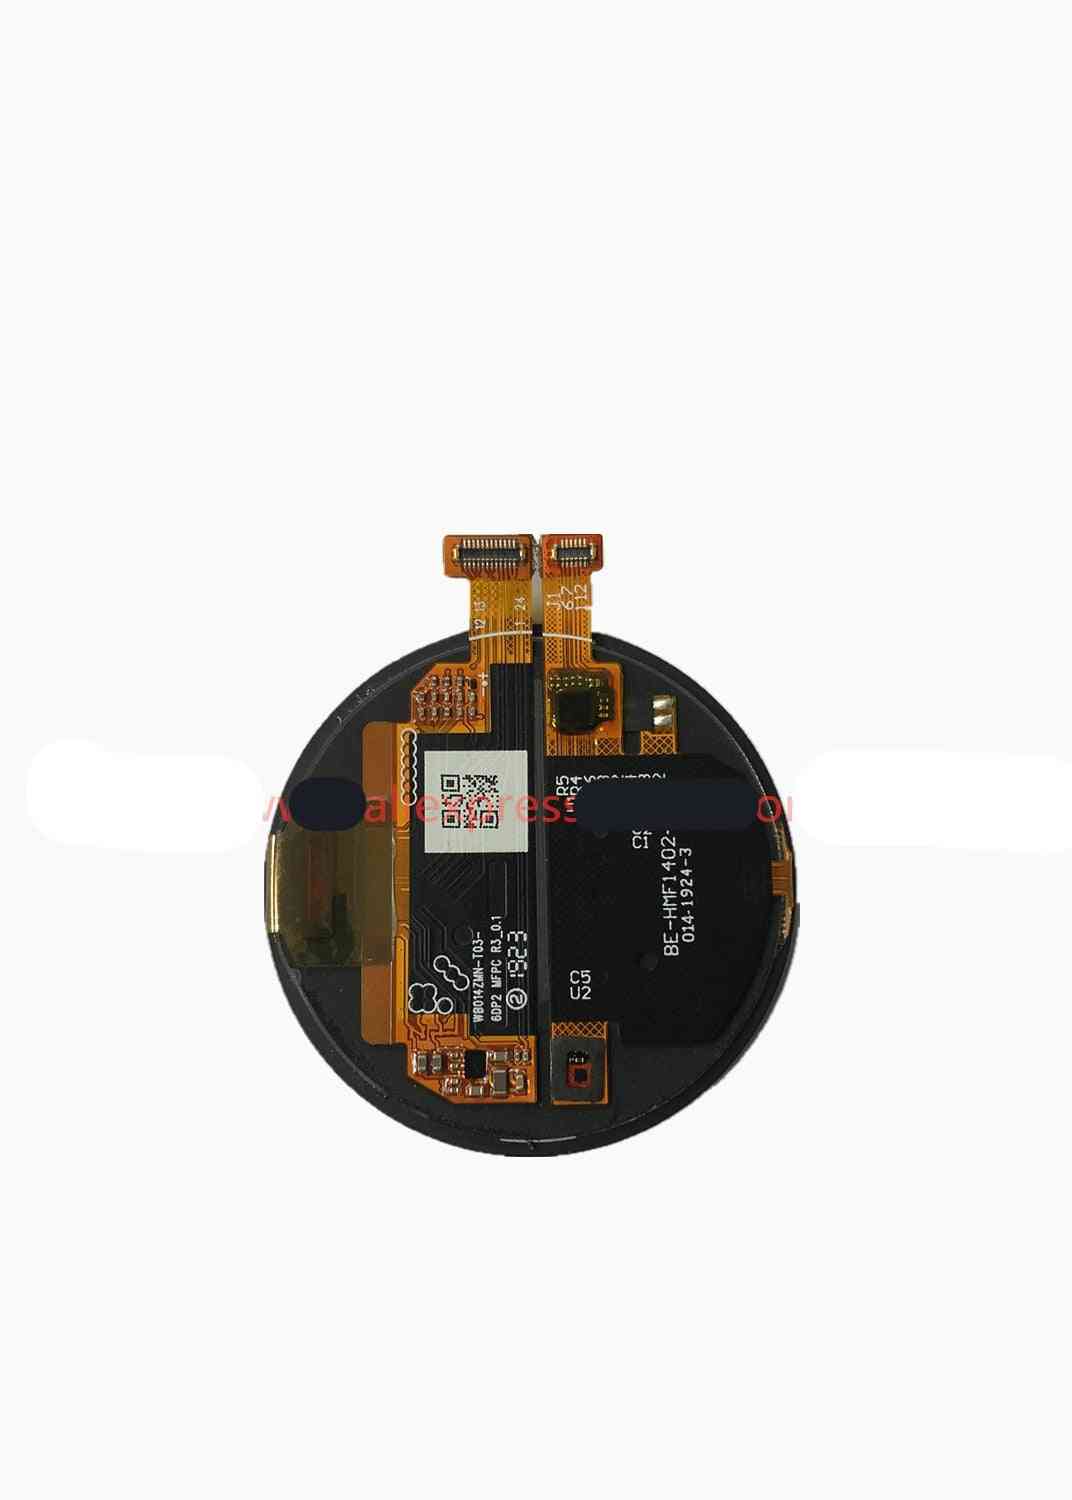 Smartwatch Lcd Display